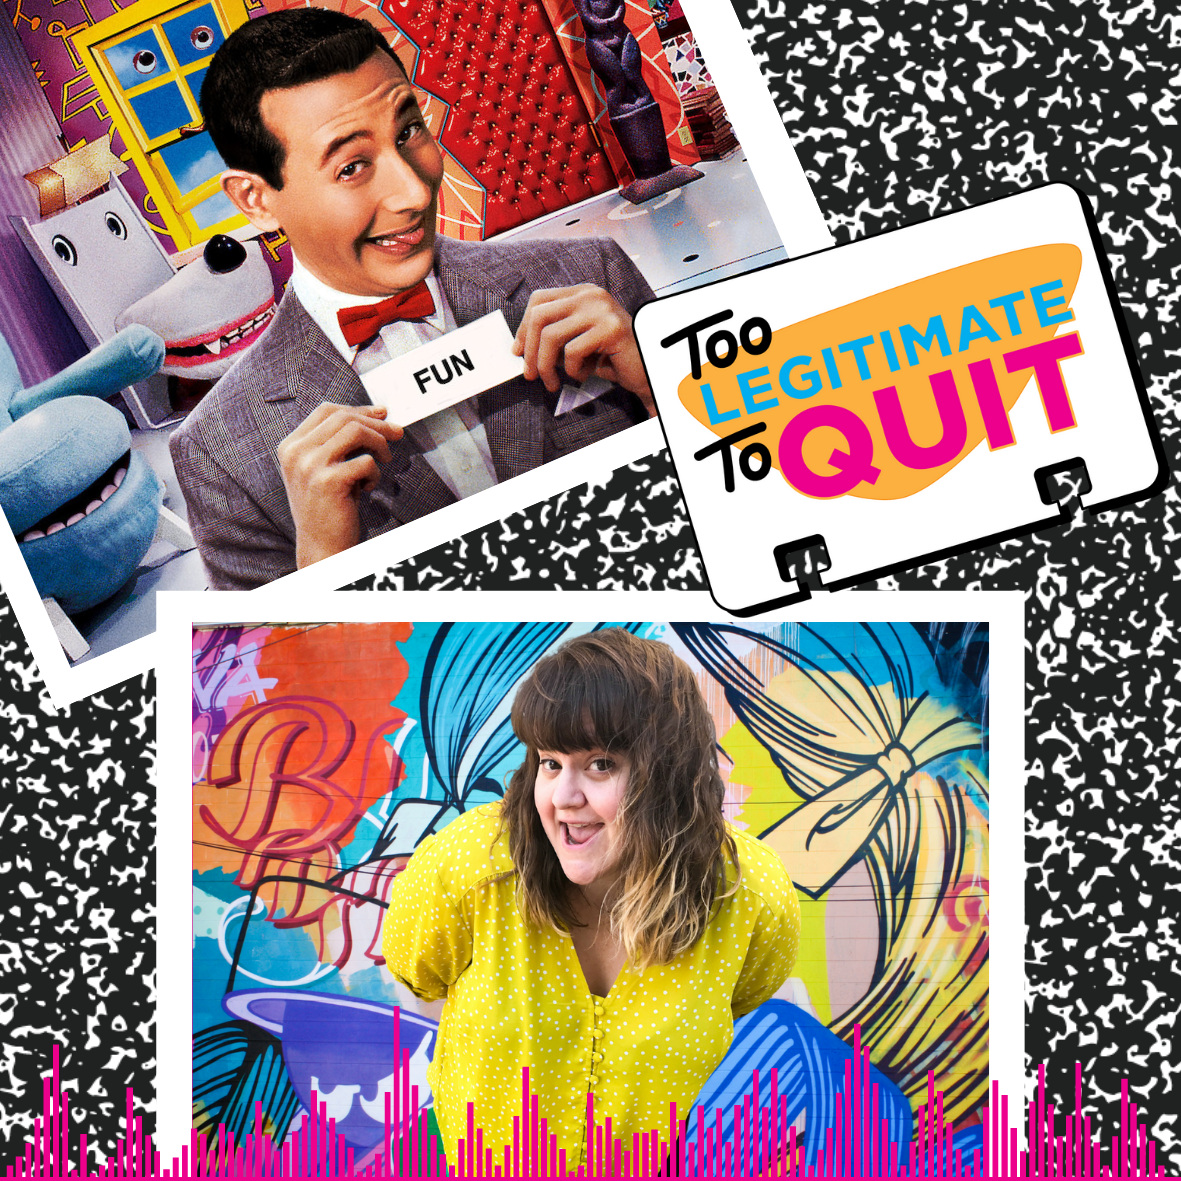 79: On Self-Promotion, Belonging & Pee-wee's Playhouse (feat. Deanna Seymour) Image